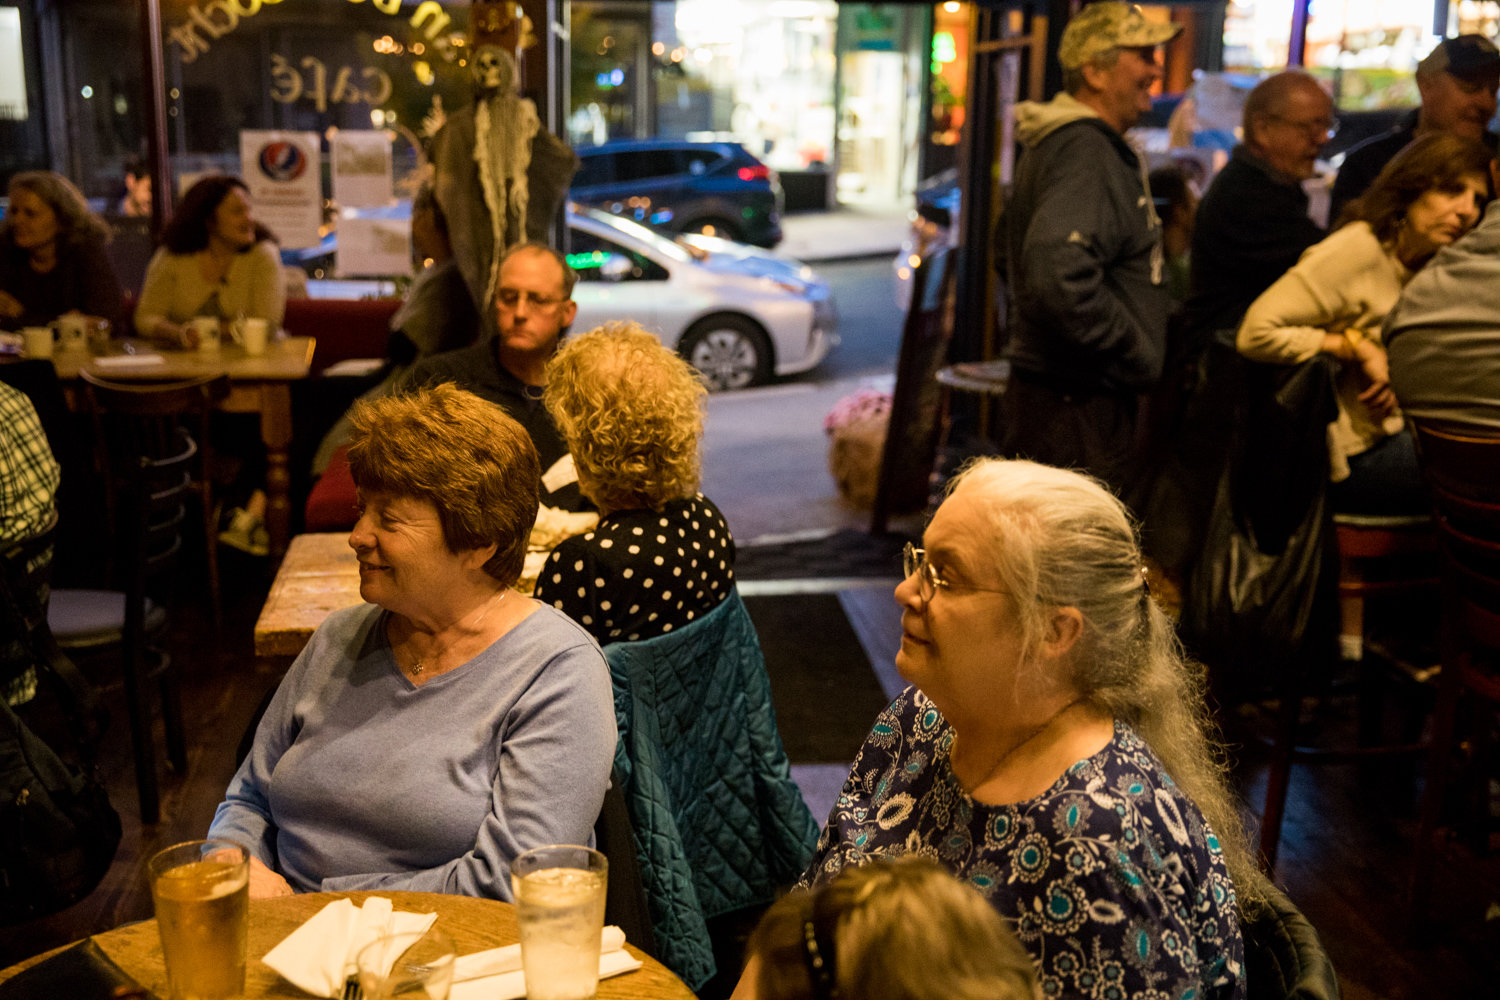 Patrons at An Beal Bocht Cafe listen to the musical stylings of Mary Courtney, a longtime regular performer at the West 238th Street establishment.